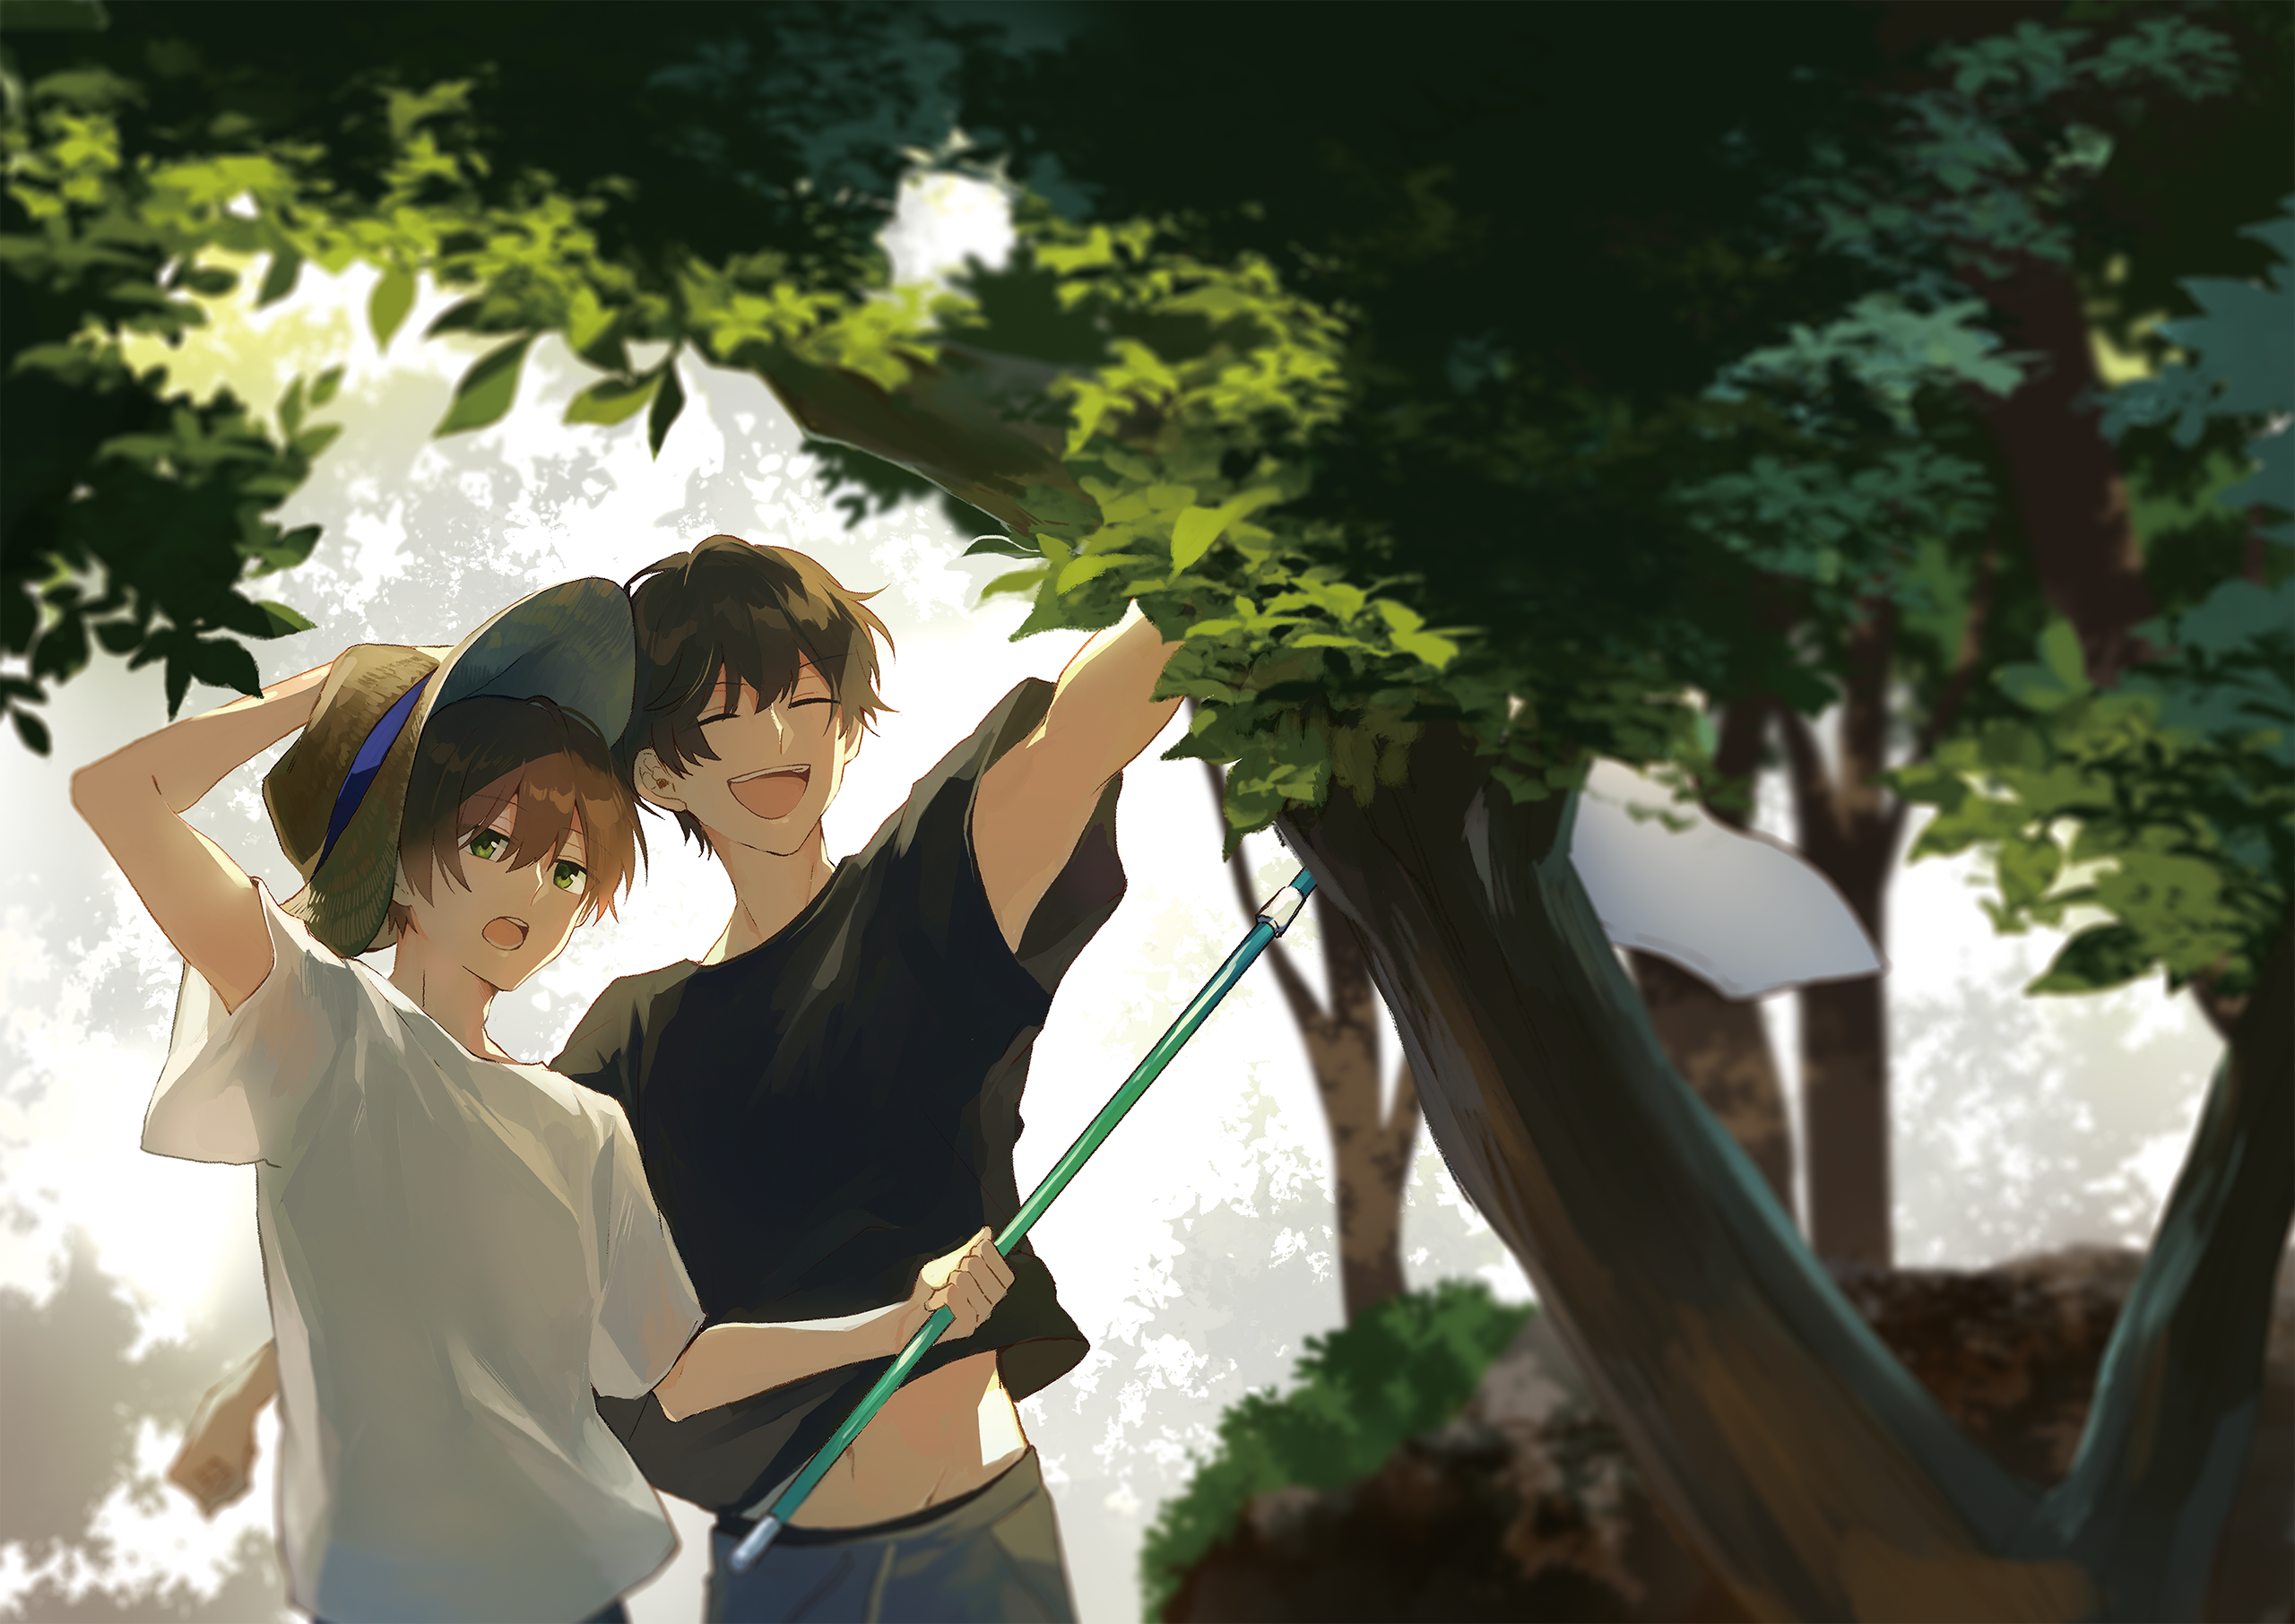 Male Anime Summer Yaoi Smiling Straw Hat Trees Leaves 2560x1812